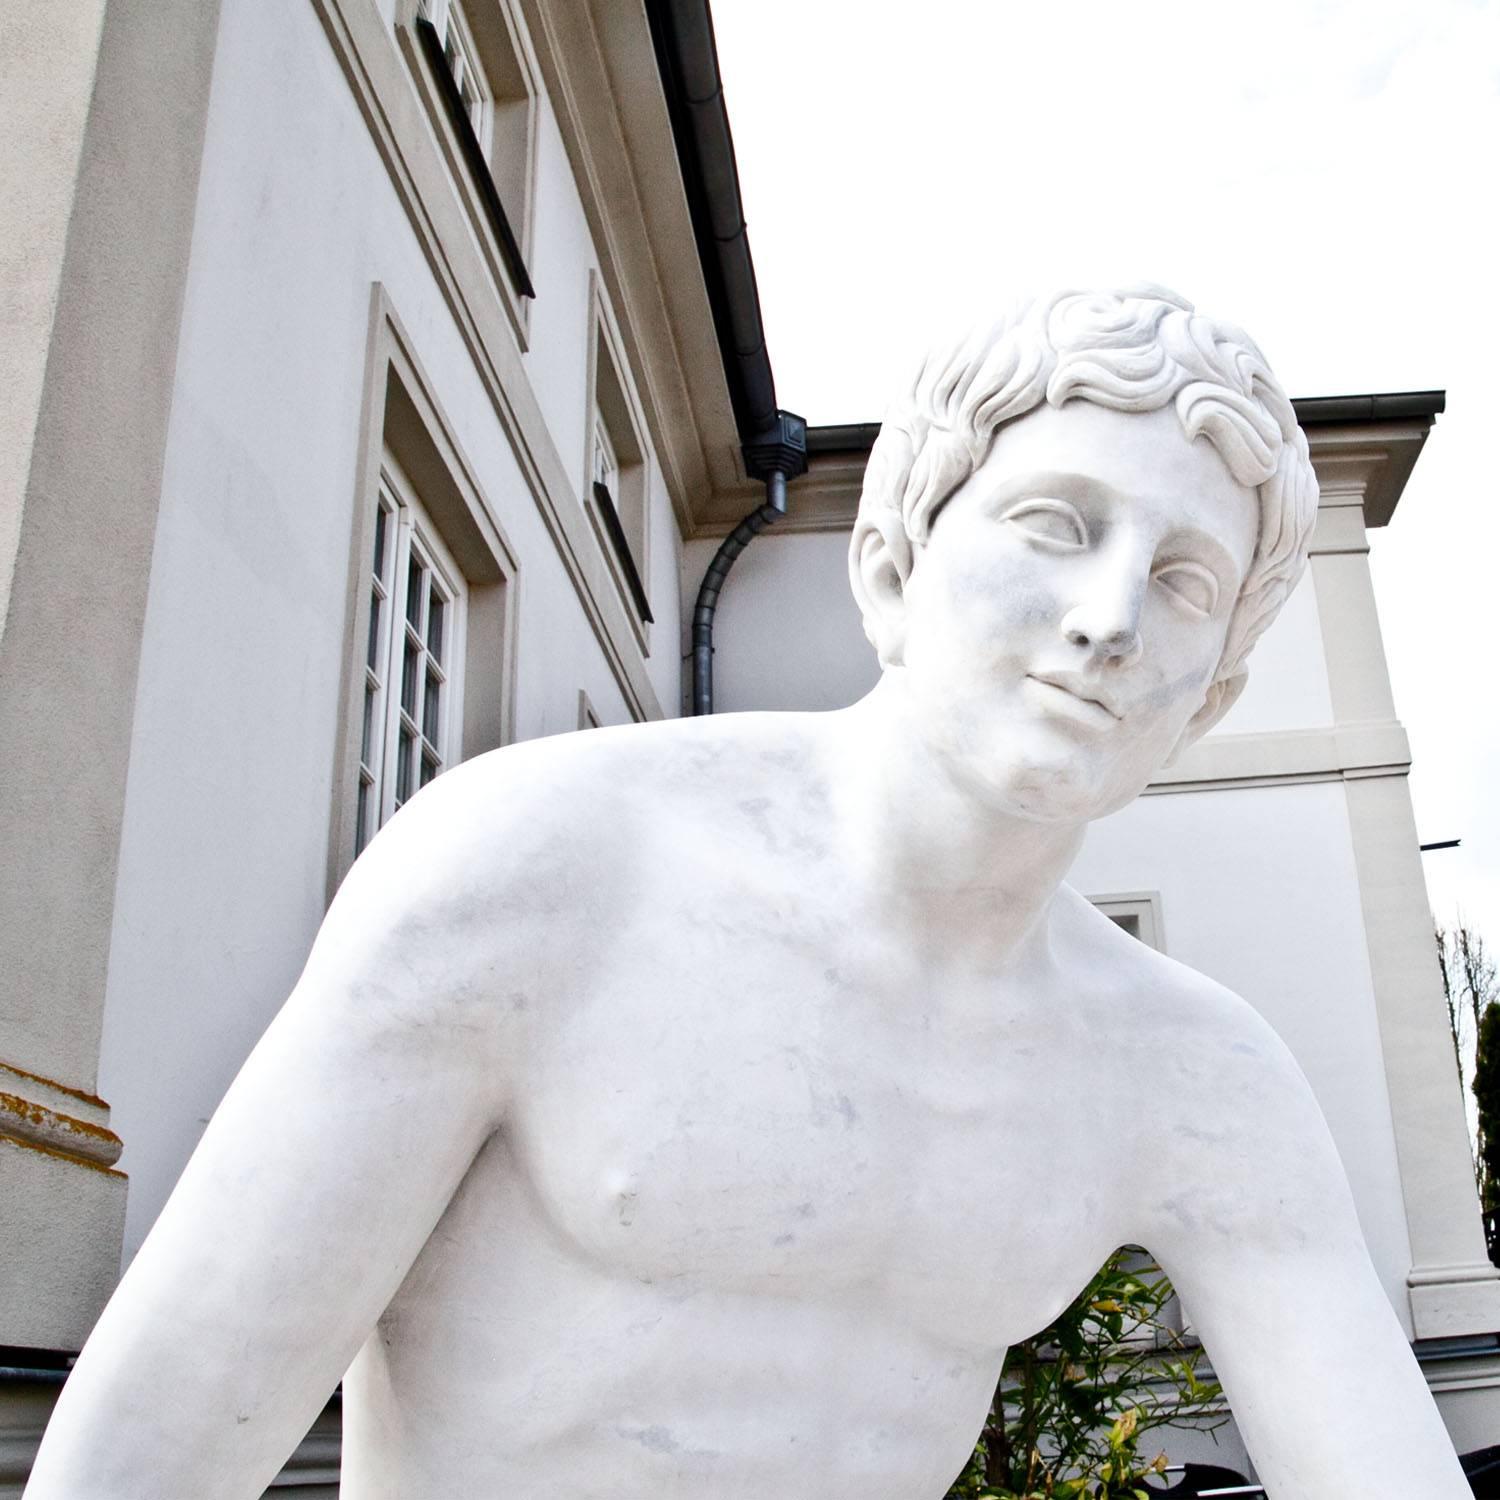 Life-sized marble sculpture of the so called ‘Resting Hermes’ by Lysippos. The sculpture was hand-carved out of white marble and has a fine surface.